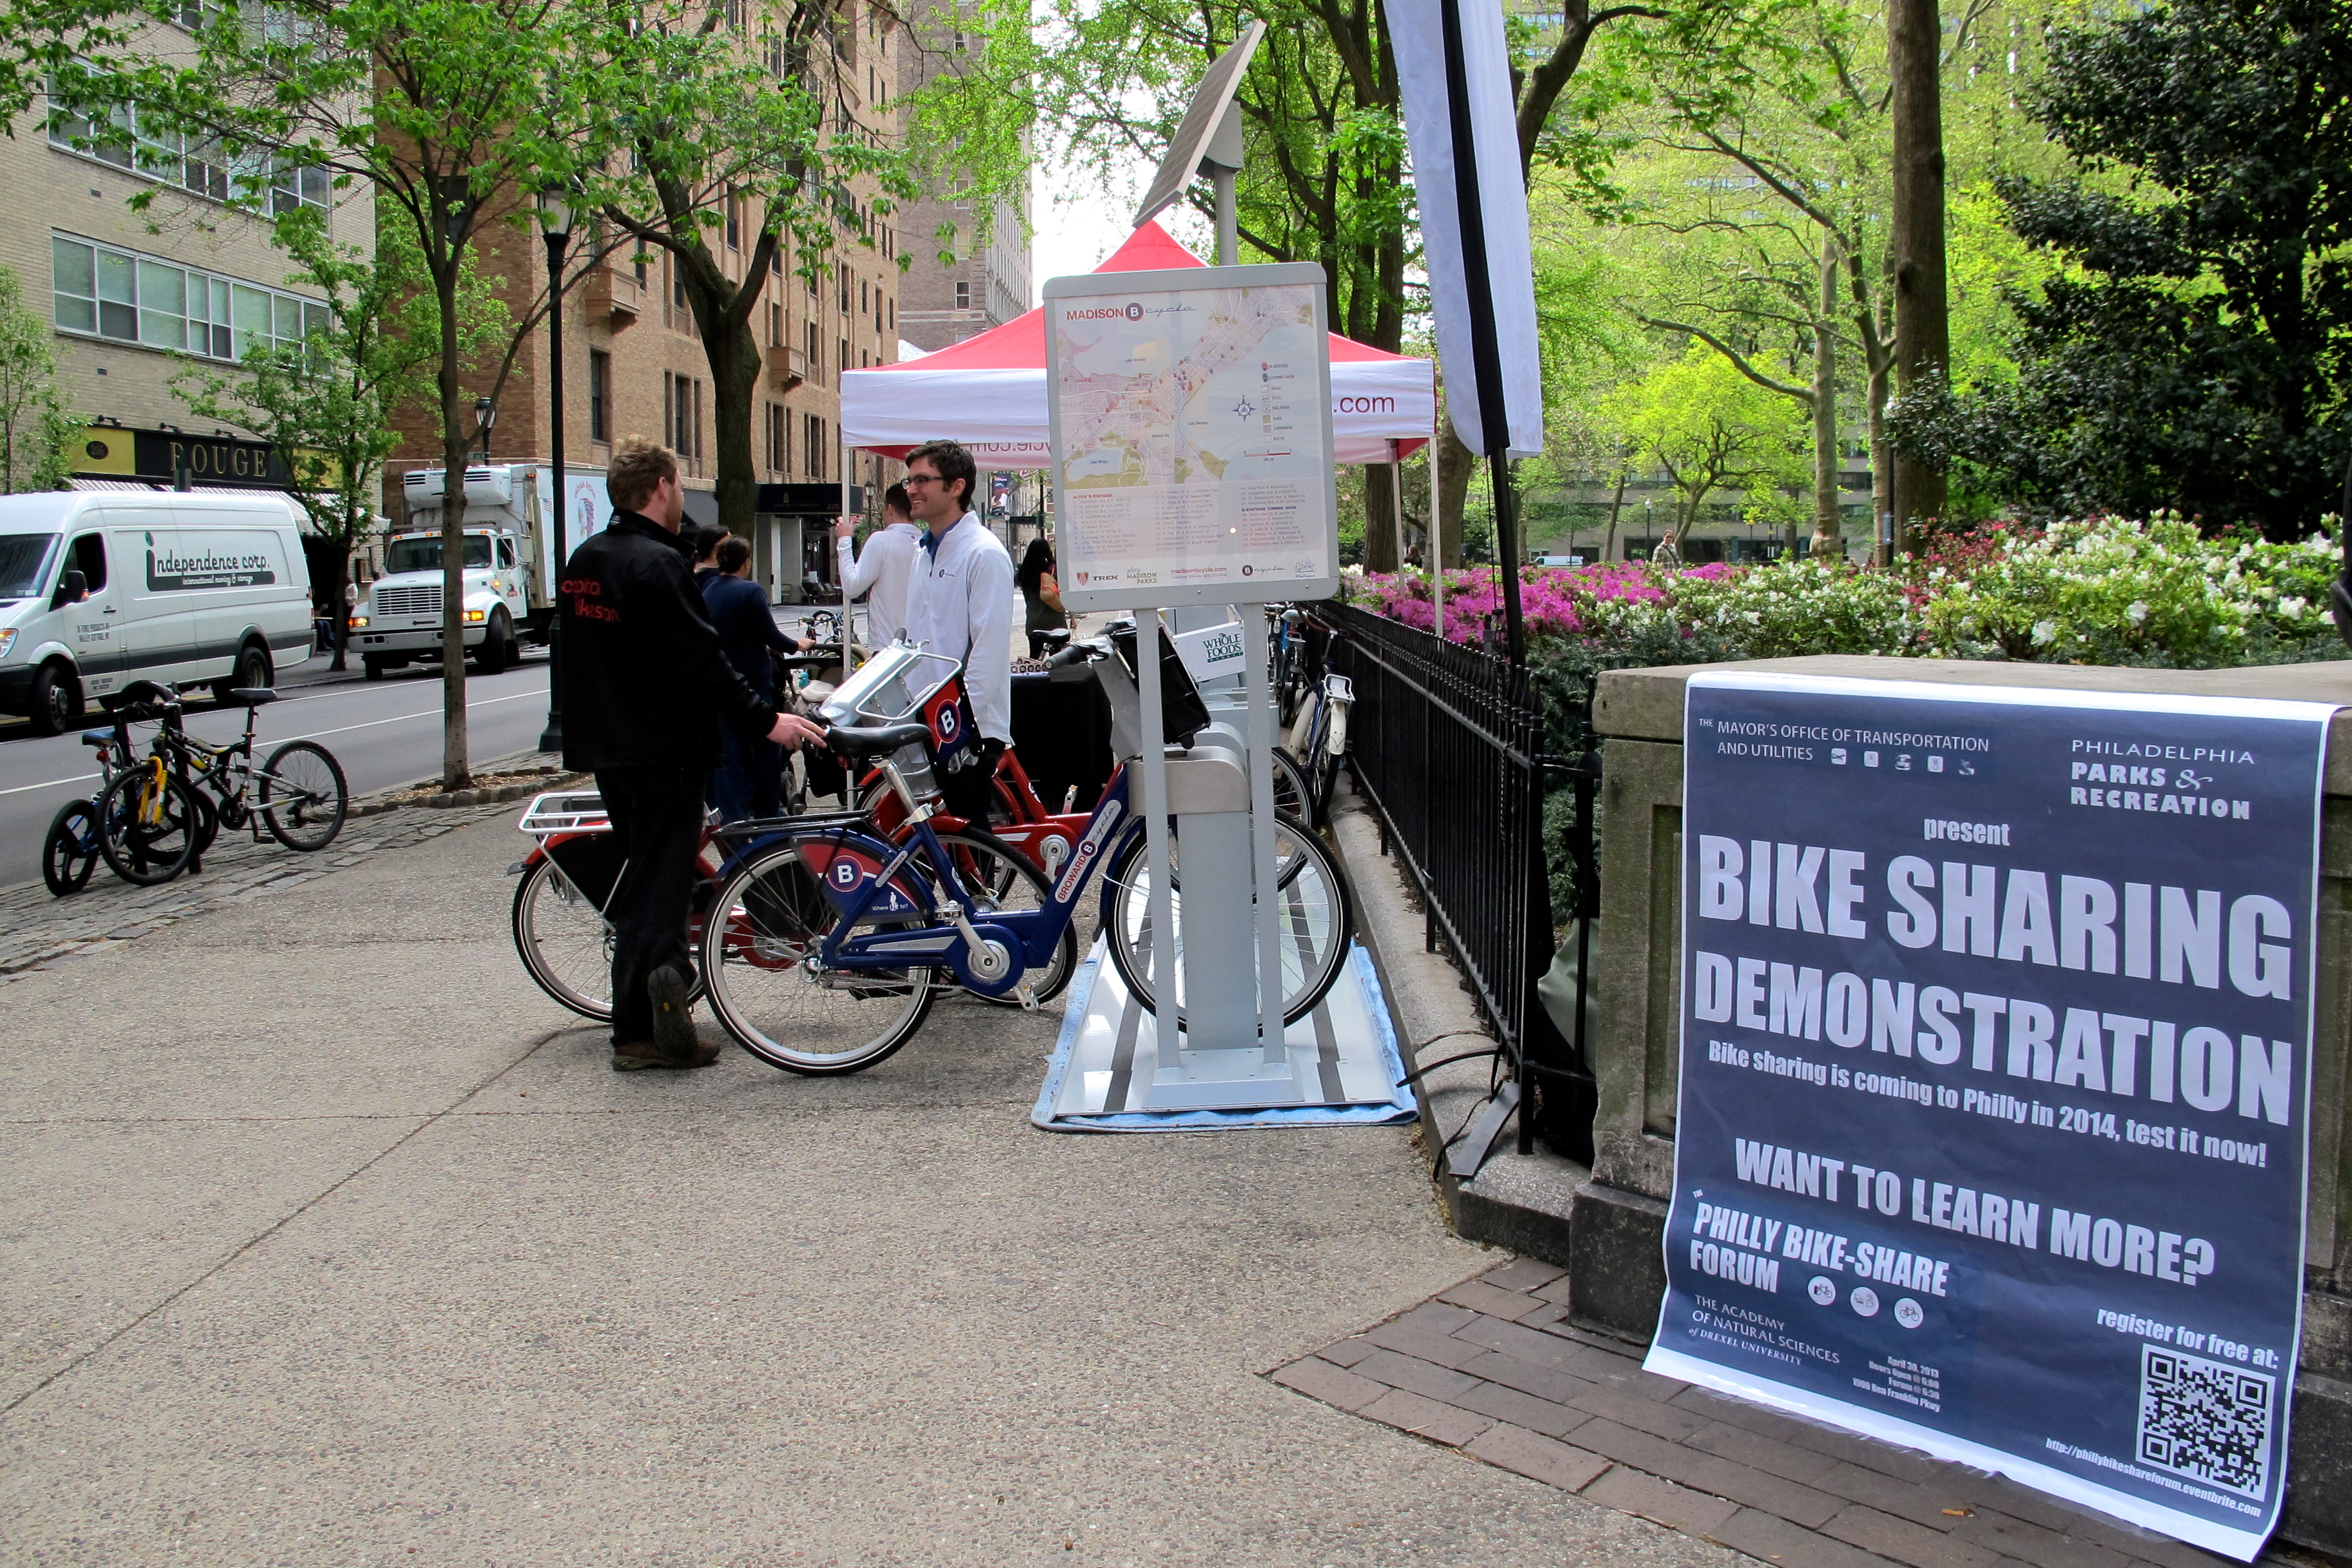 Bike sharing demo today at 18th and Walnut.